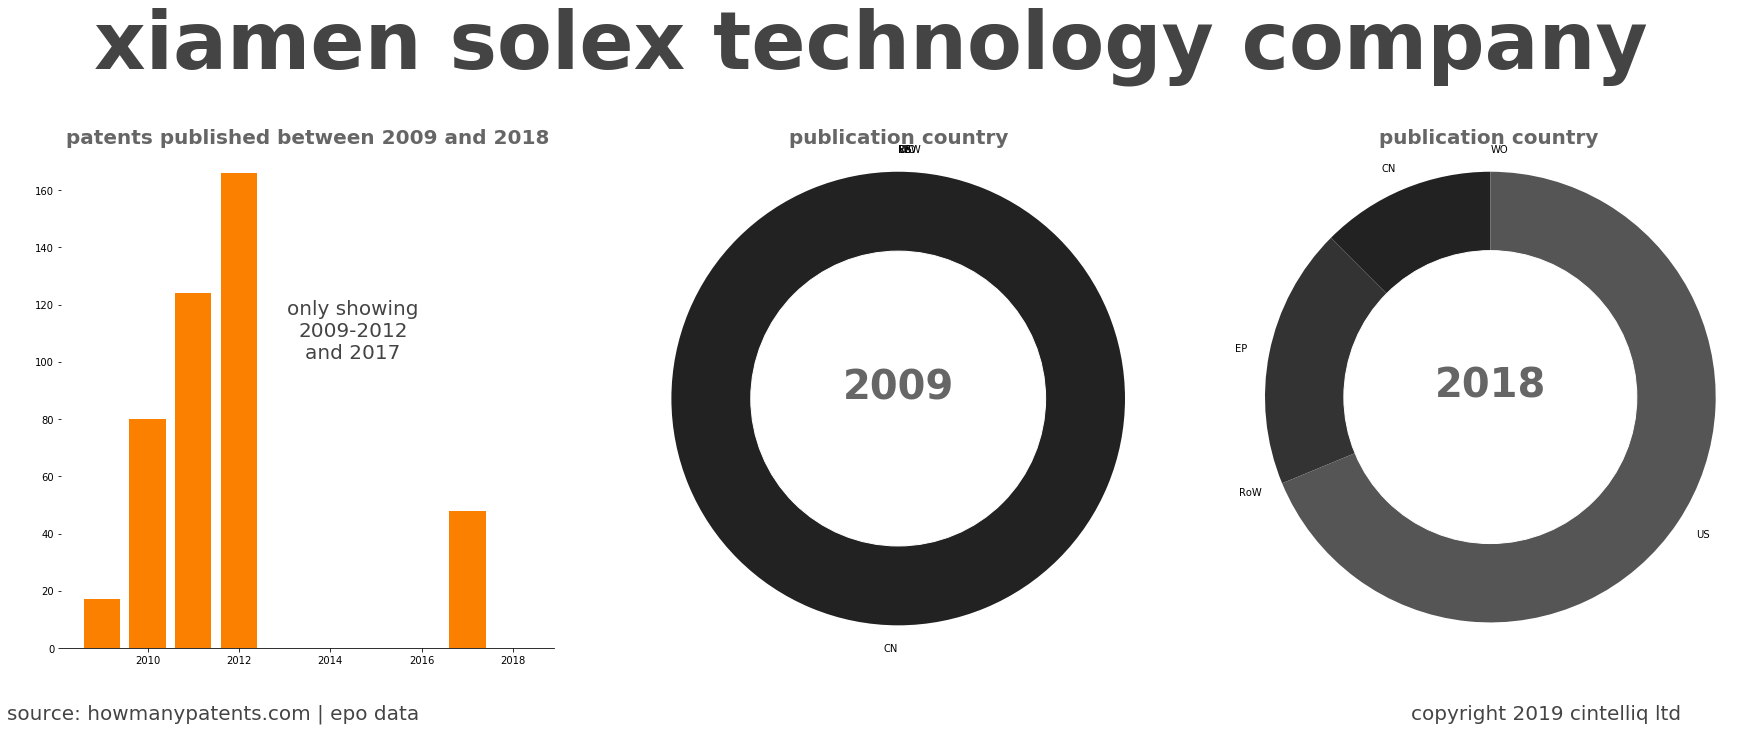 summary of patents for Xiamen Solex Technology Company